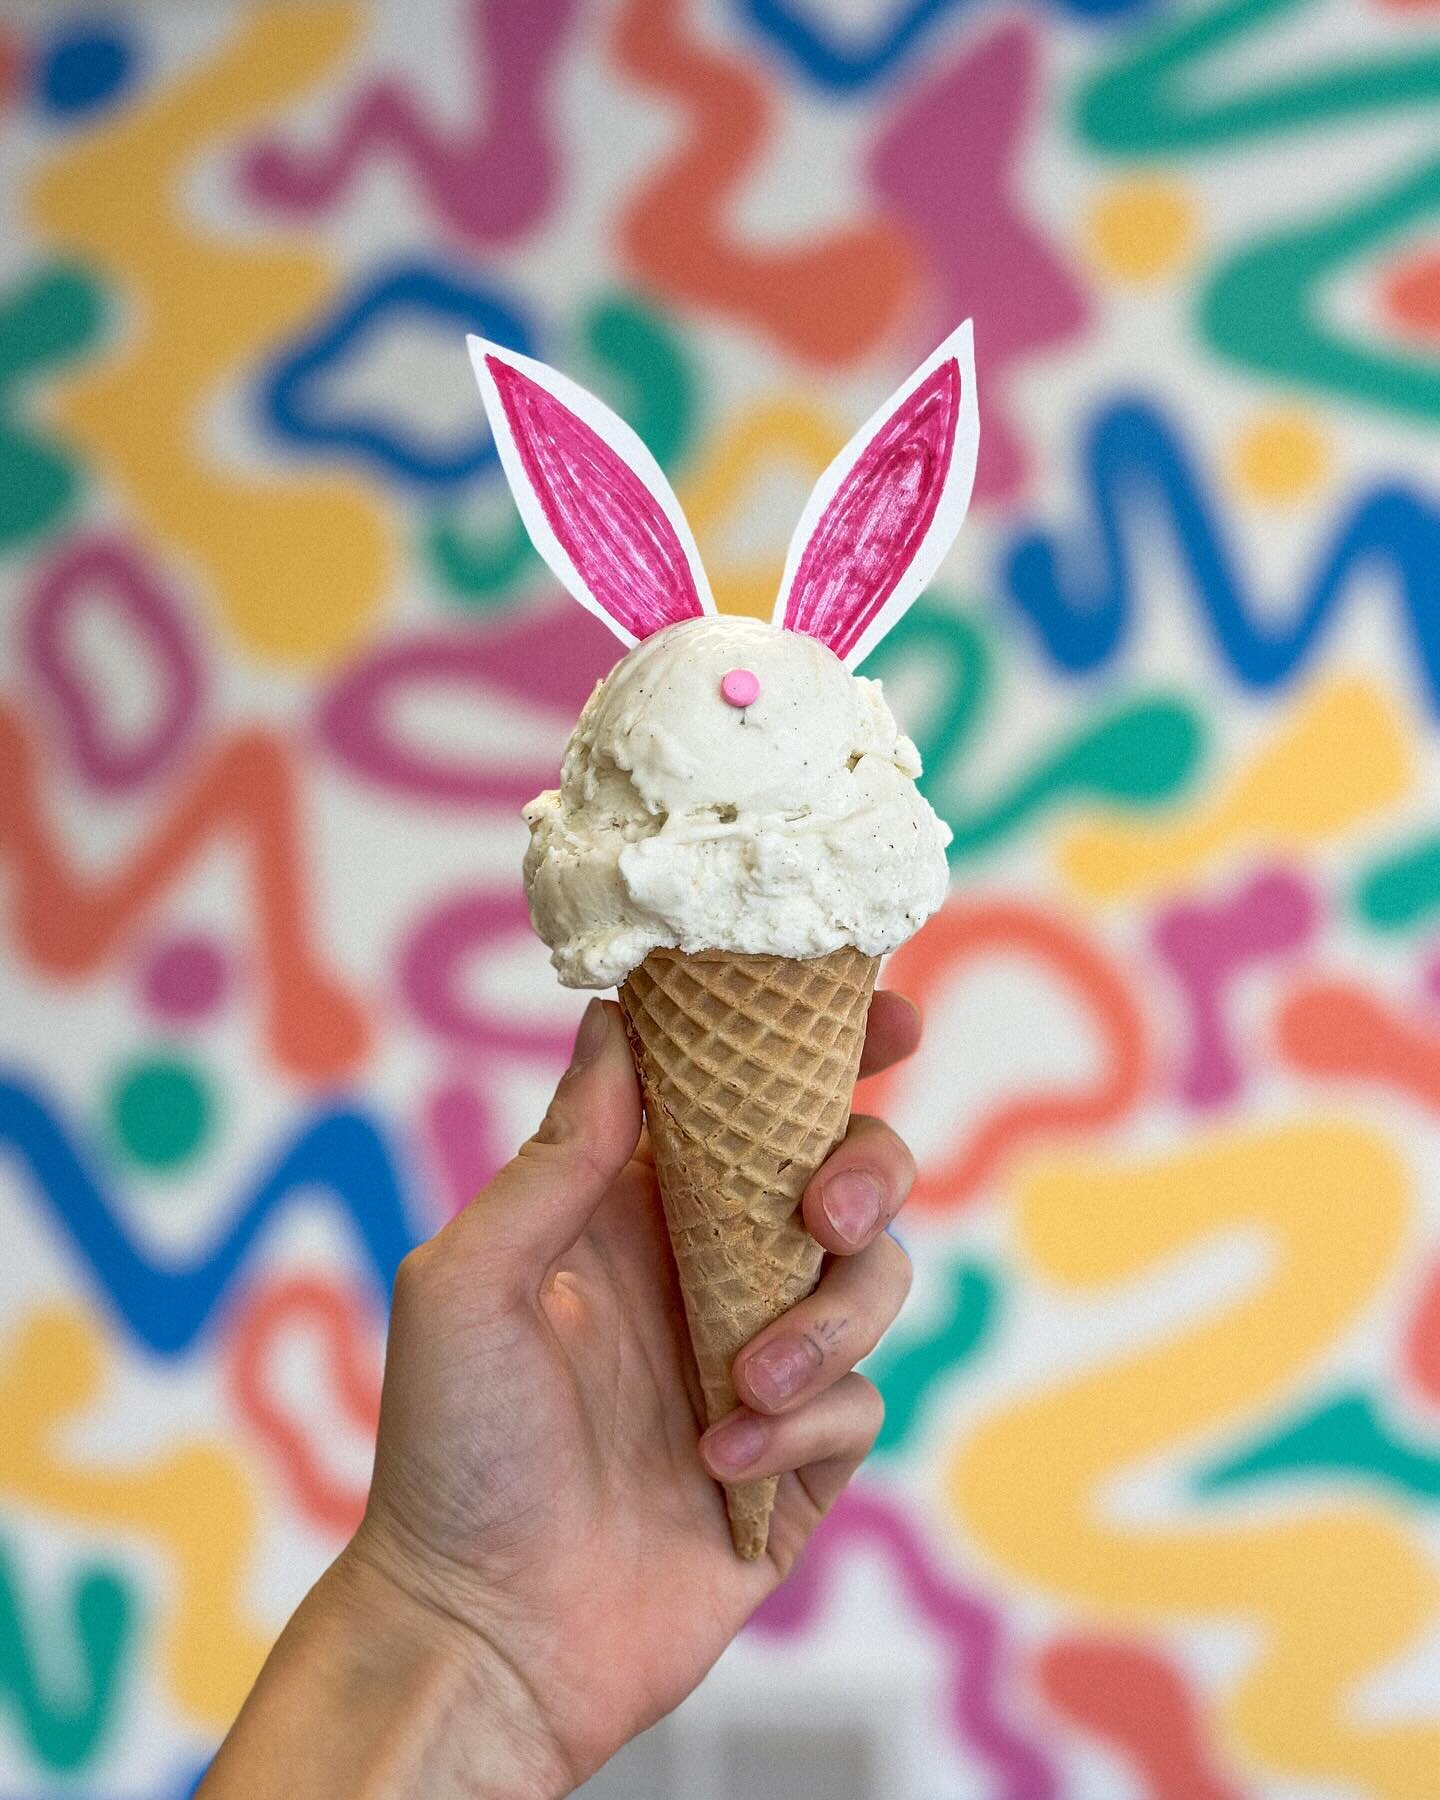 Happy Easter!! 🍦🐰
We are open today 1pm - 9pm.